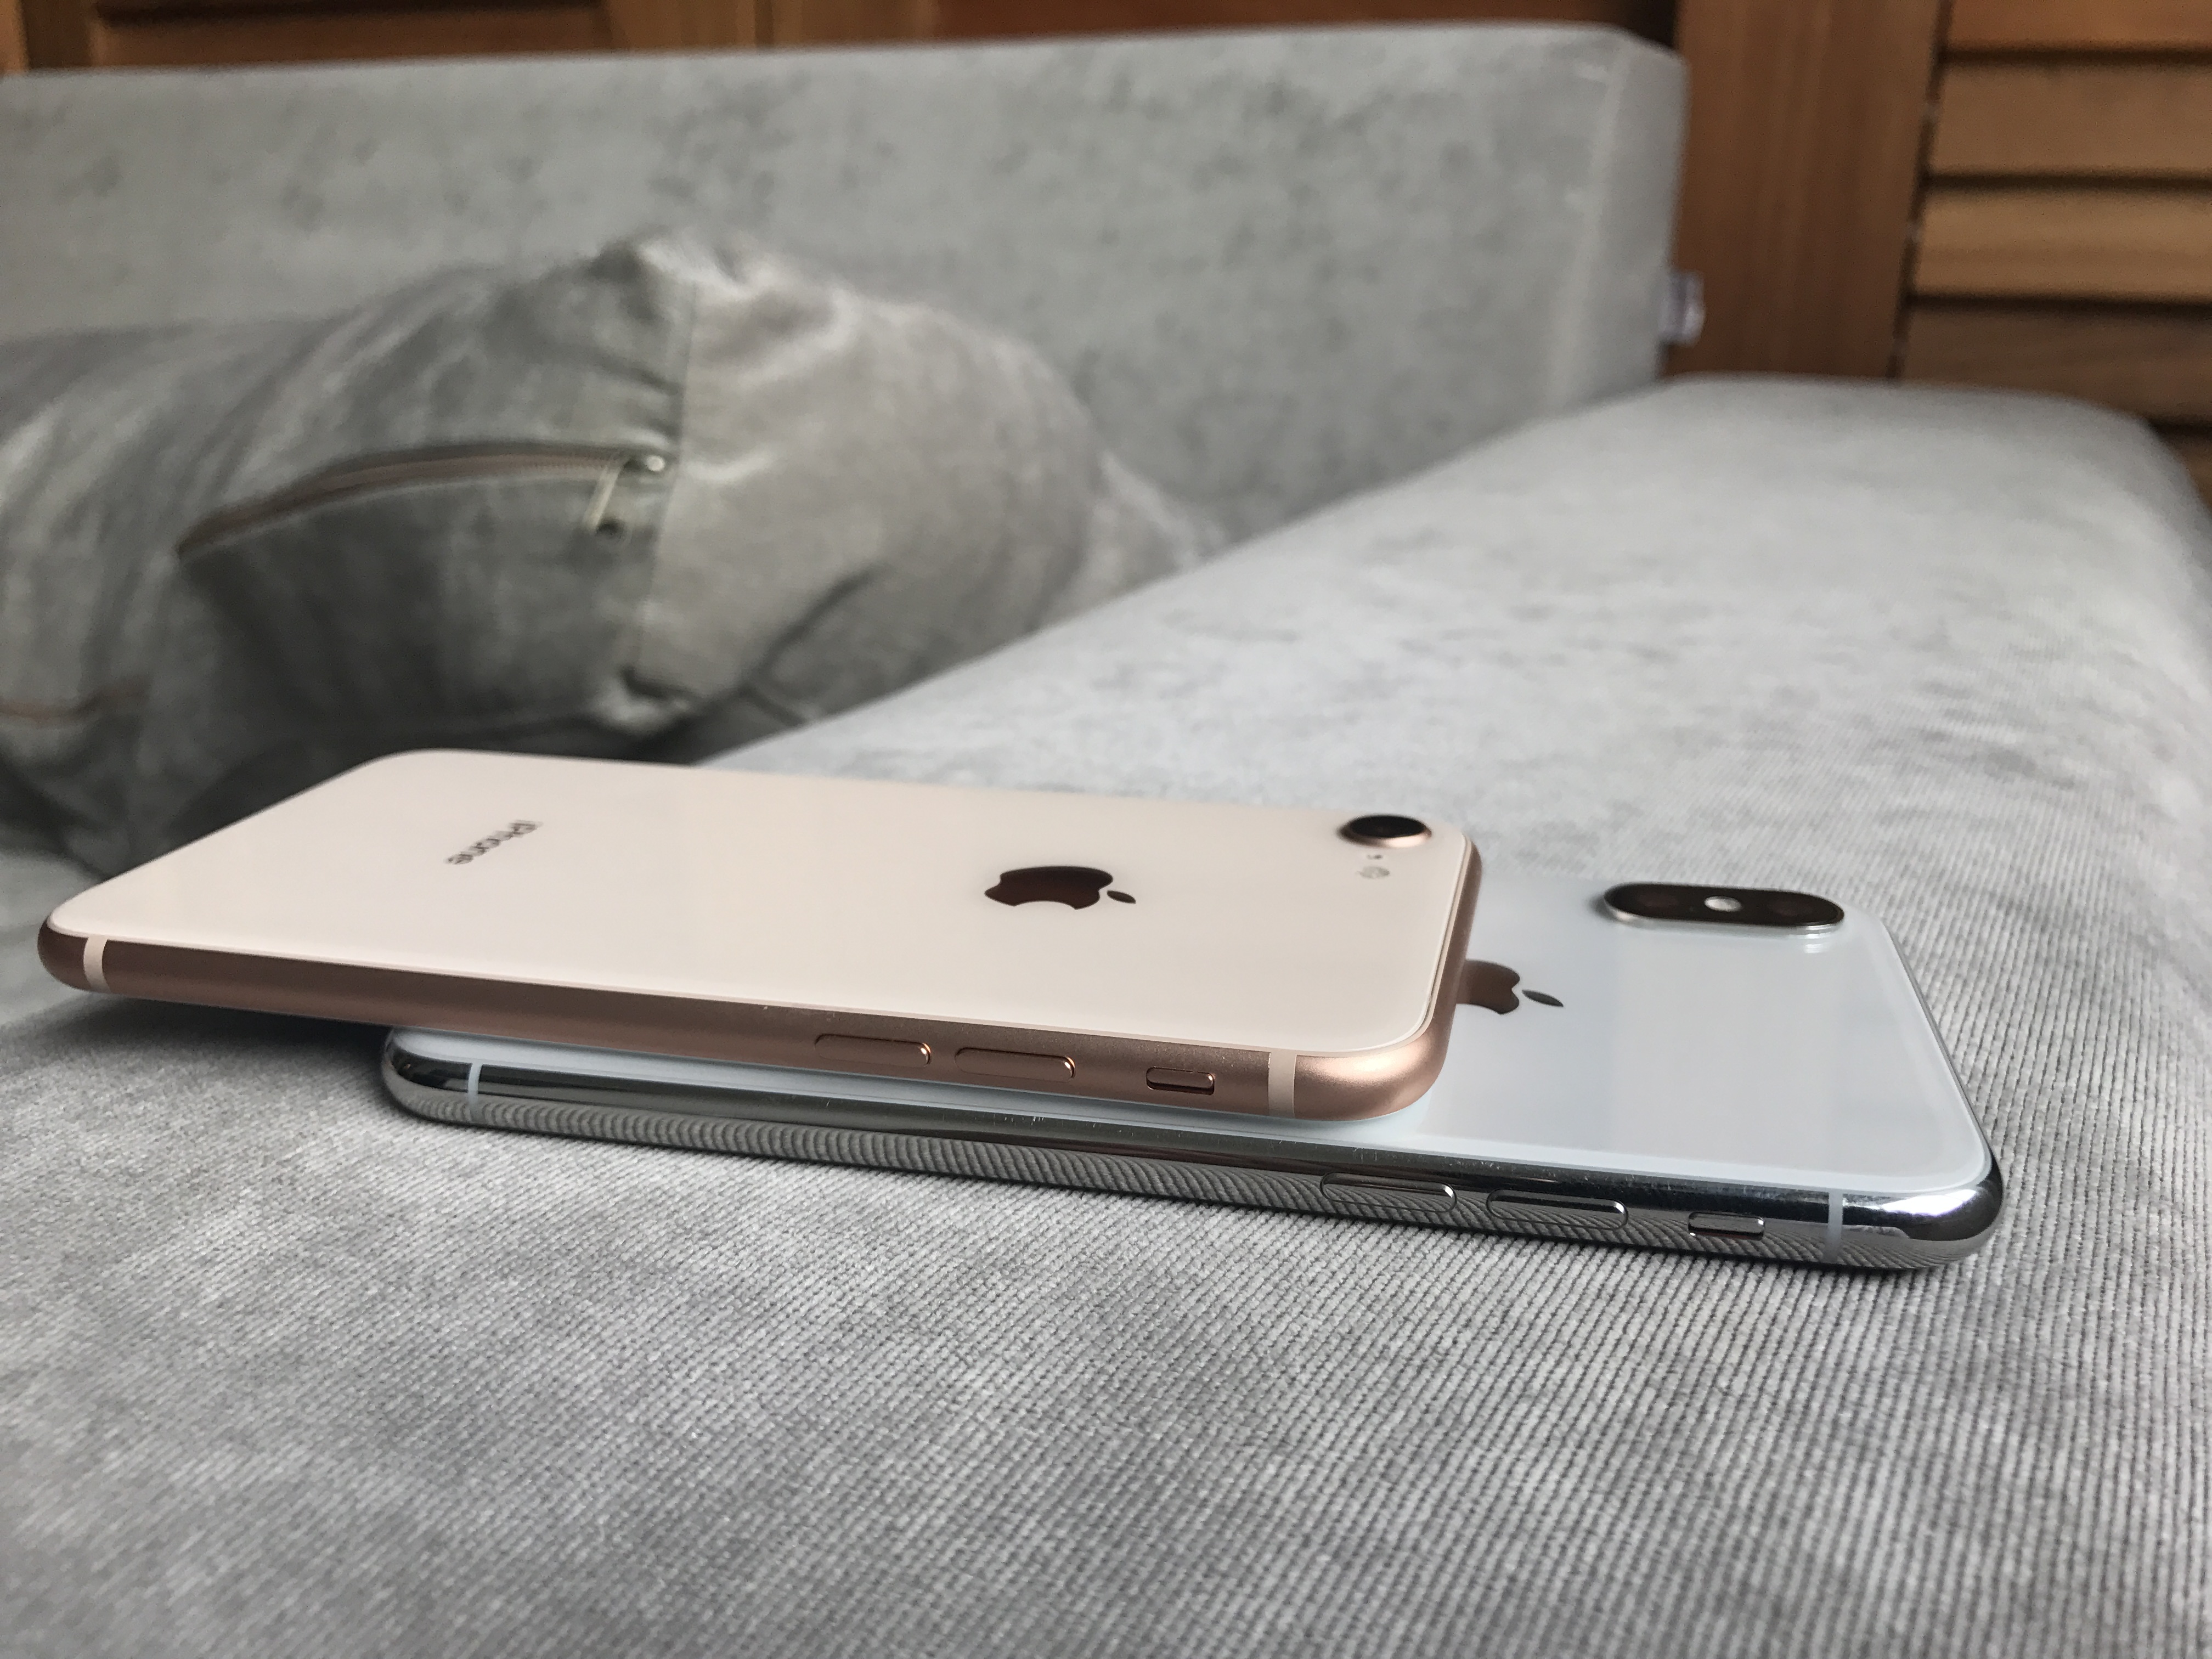 iPhone 8 on top of iPhone X